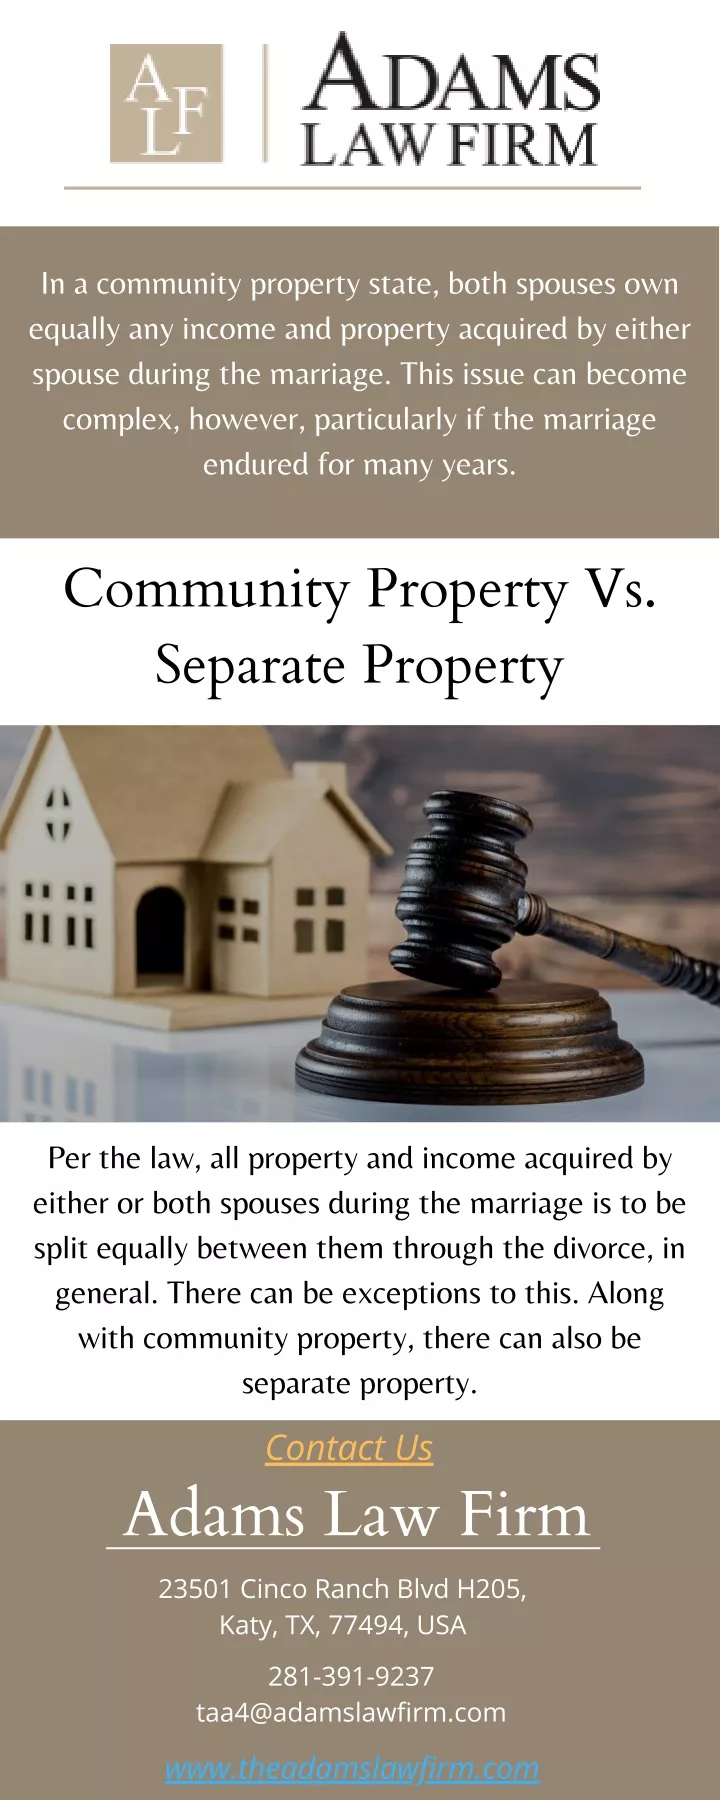 in a community property state both spouses